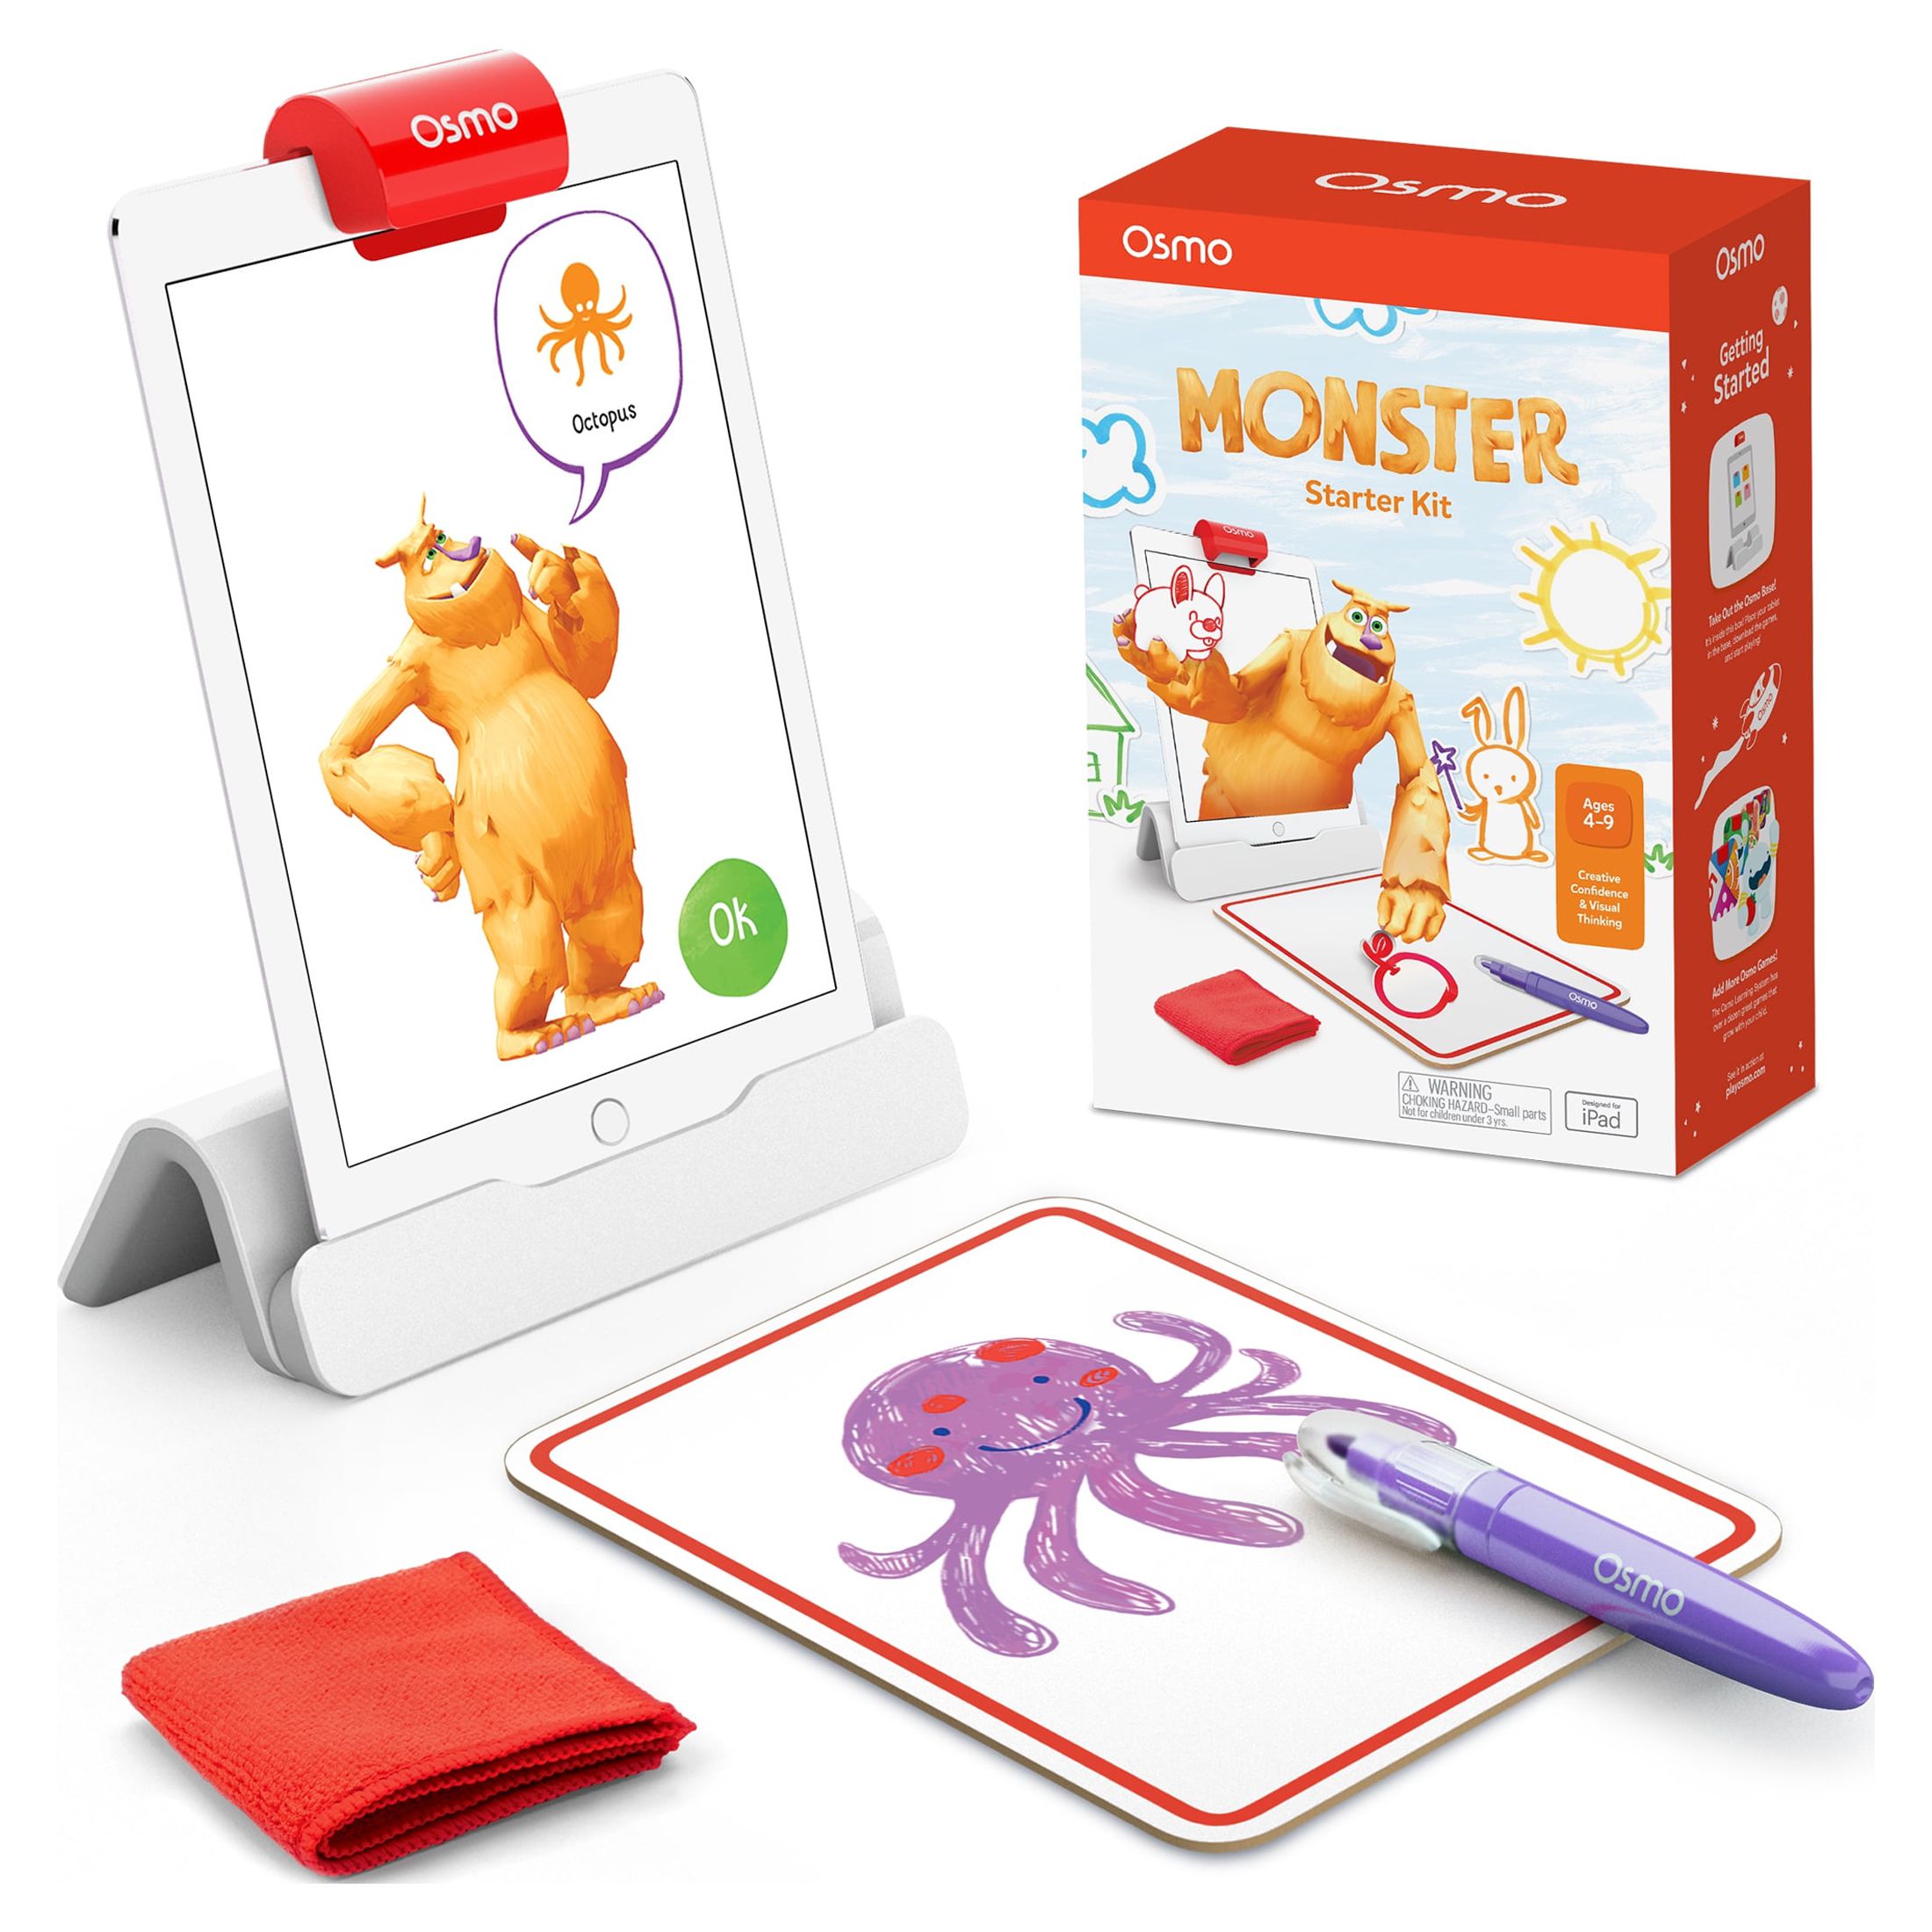 Osmo - Monster Starter Kit for iPad, Ages 5-10, 3 Educational Games, Learn Creative Drawing, Cartoon Drawing, Physics Toy, Erasable Drawing Board, Arts and Crafts, Art Sets, Kids Activities, STEM Toys - image 1 of 8